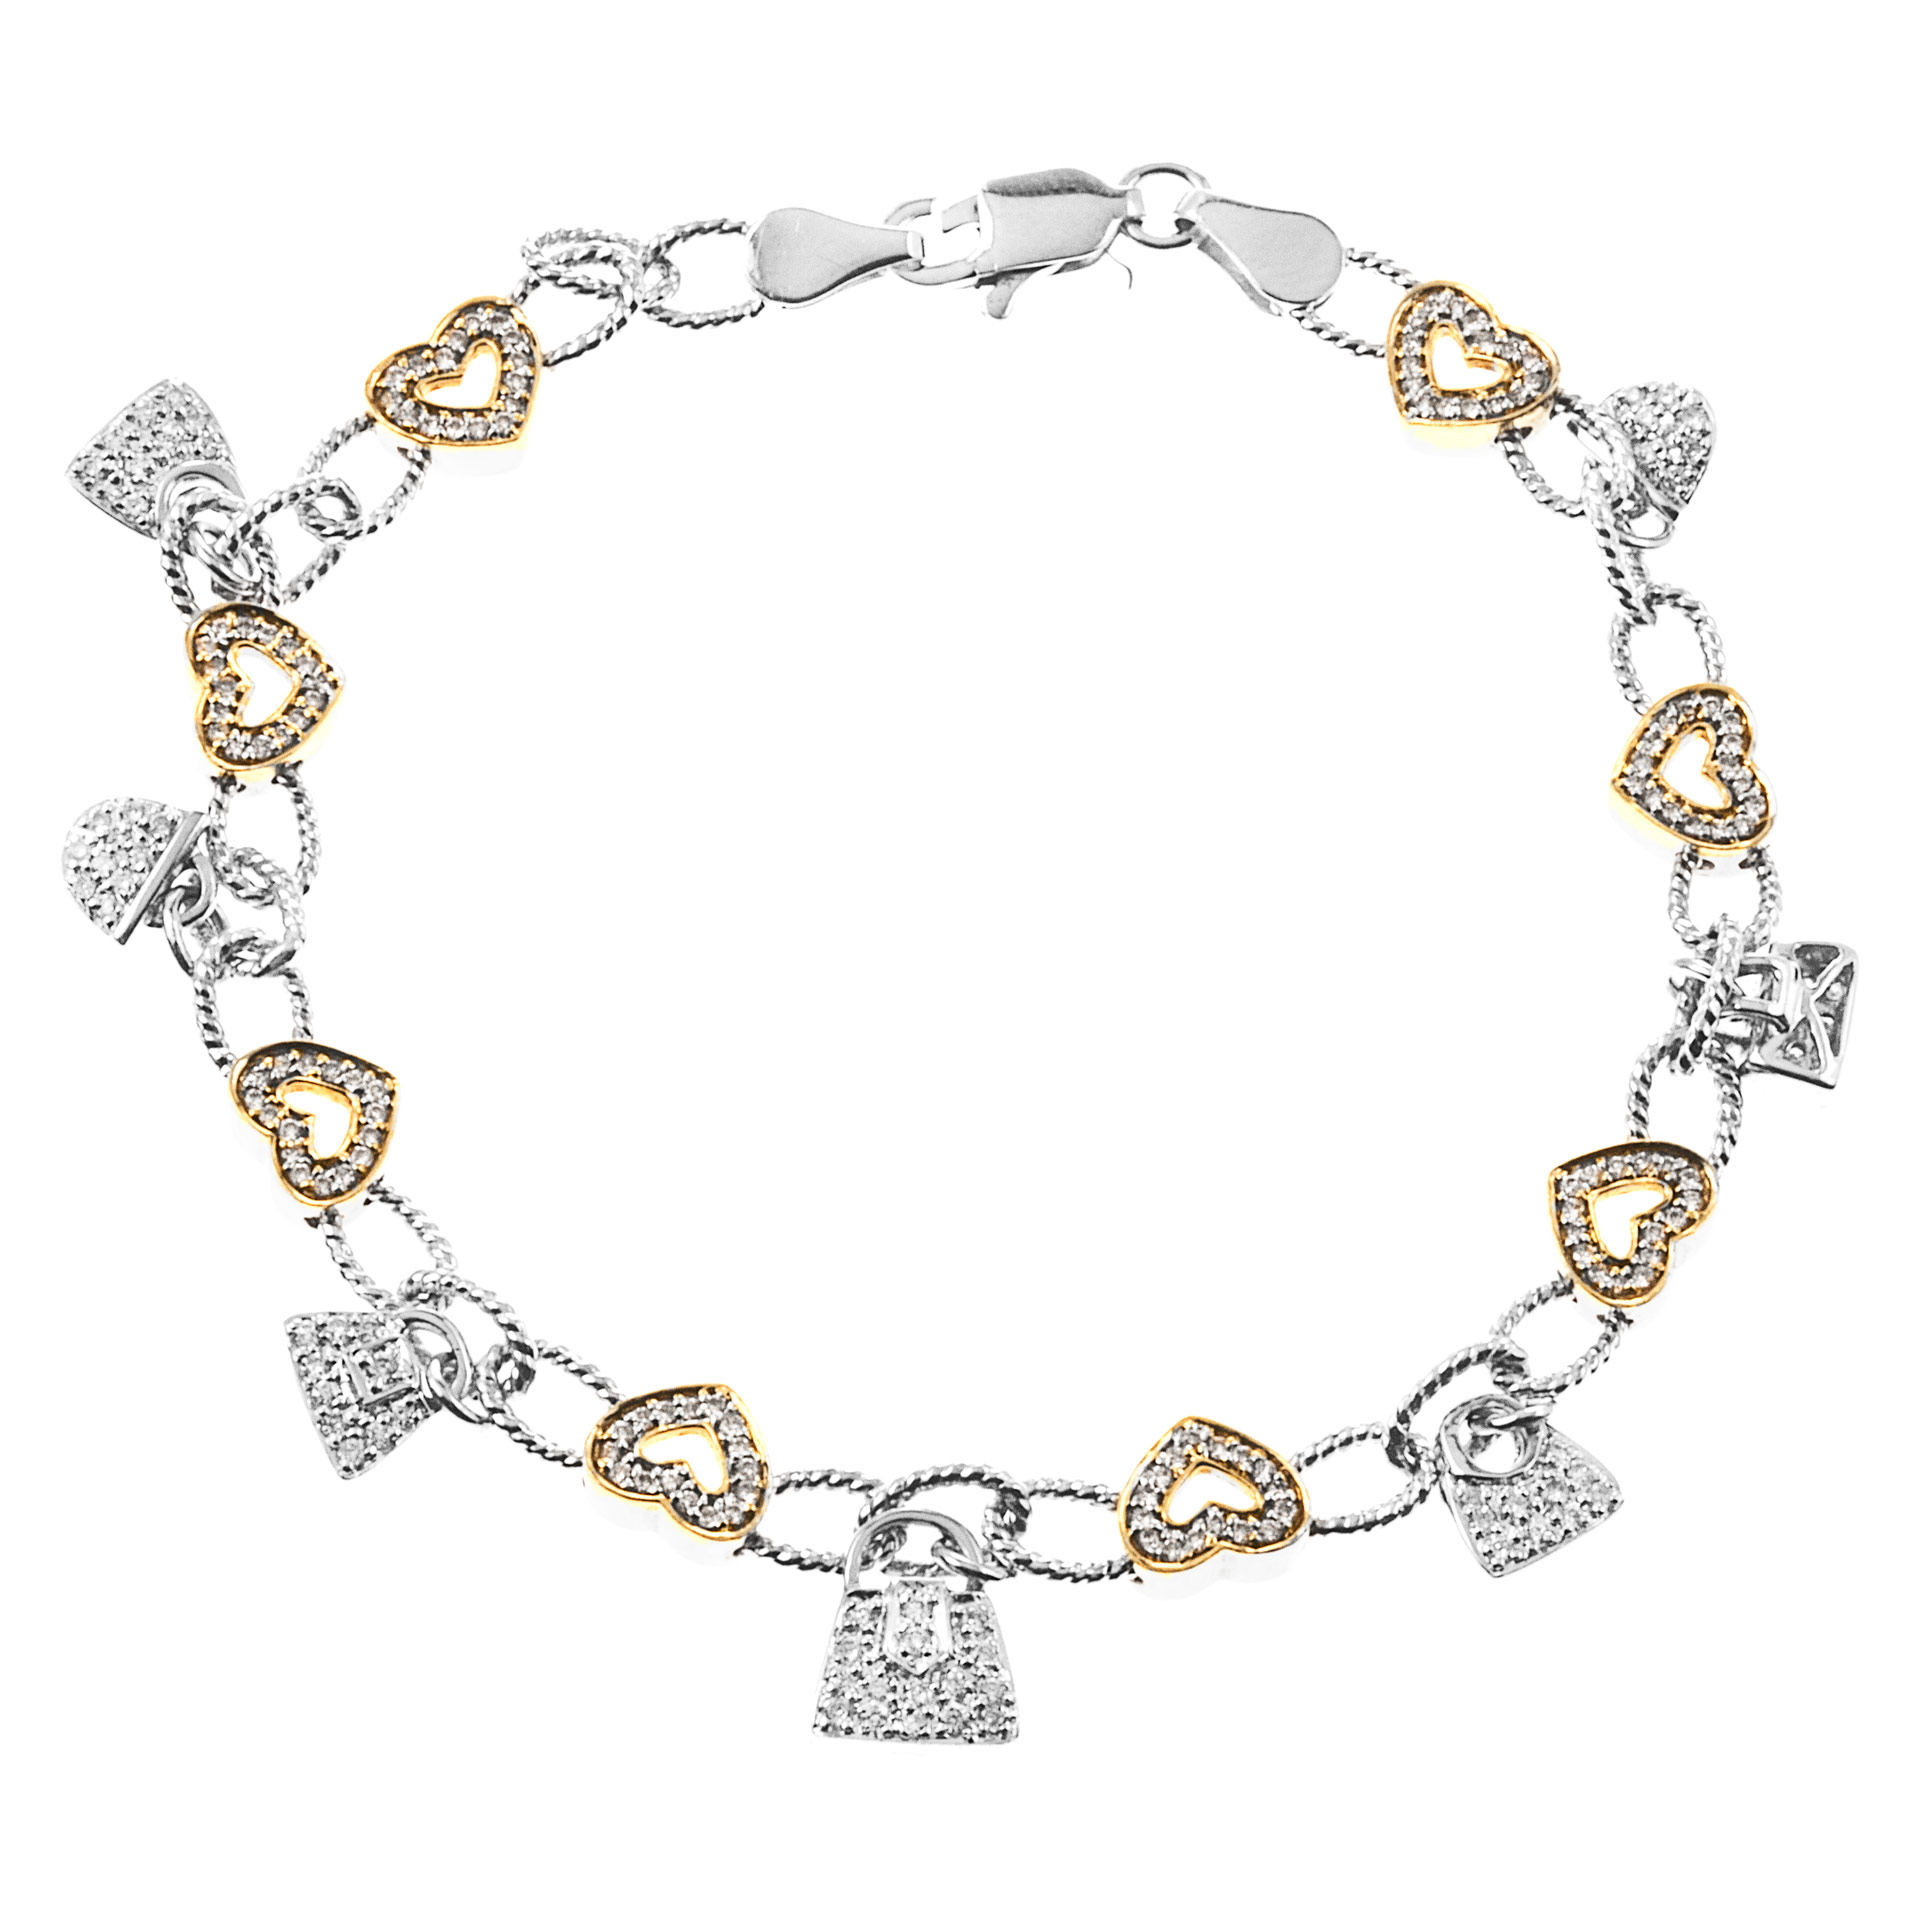 Stylish two tone 18k gold bracelet with diamond charms of hearts and bags image 1